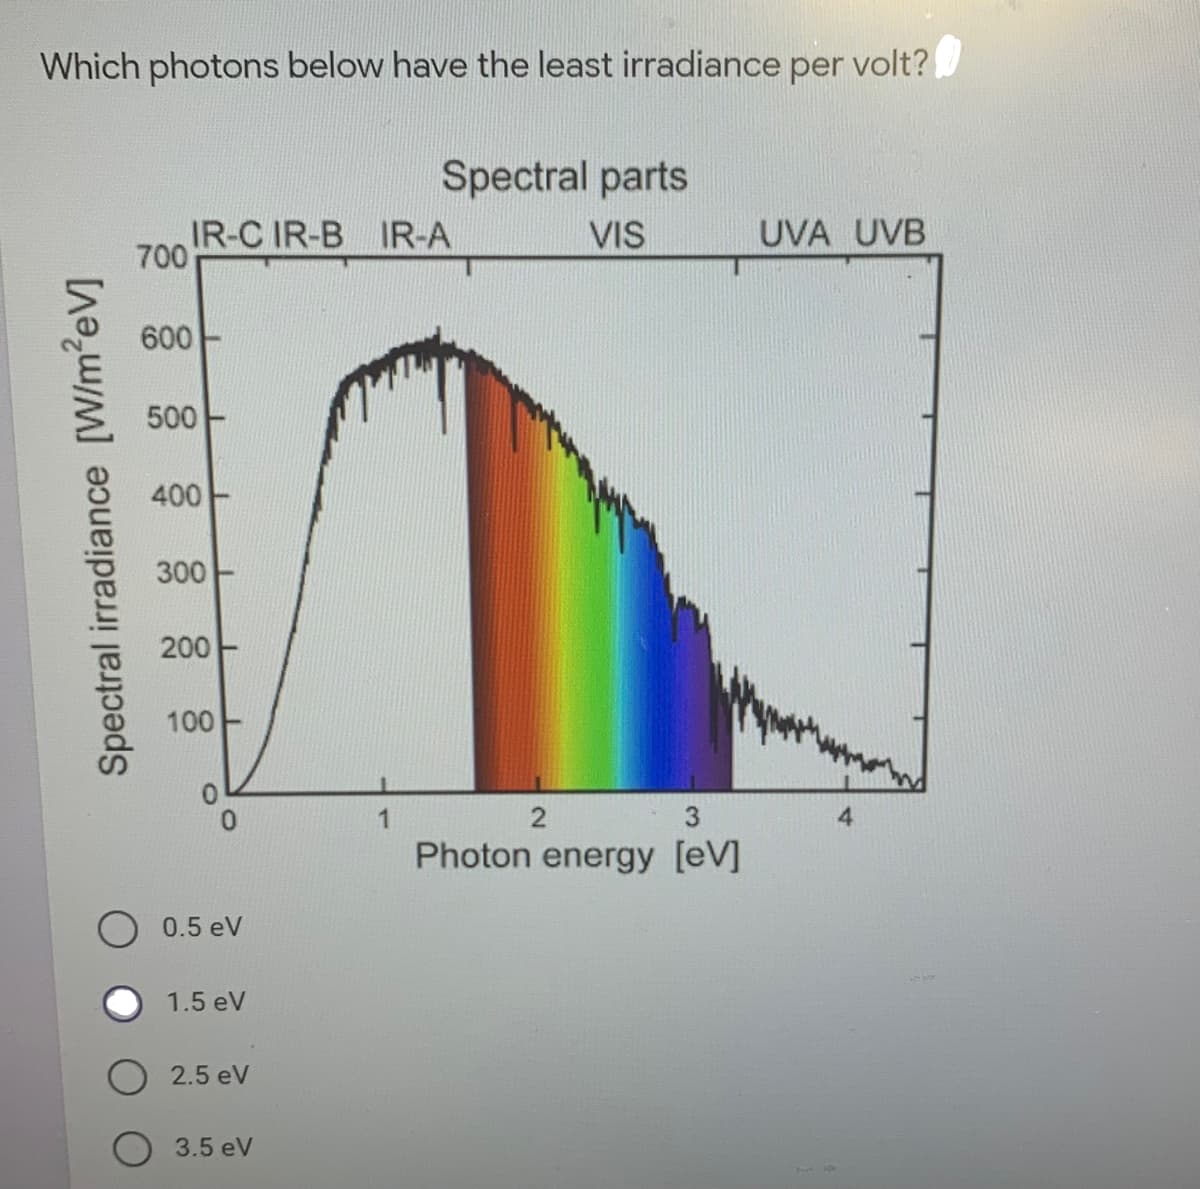 Which photons below have the least irradiance per volt?
Spectral parts
IR-C IR-B IR-A
700
VIS
UVA UVB
600
500
400
300
200
100
Photon energy [eV]
0.5 eV
1.5 eV
2.5 eV
3.5 eV
Spectral irradiance [W/m'eV]
